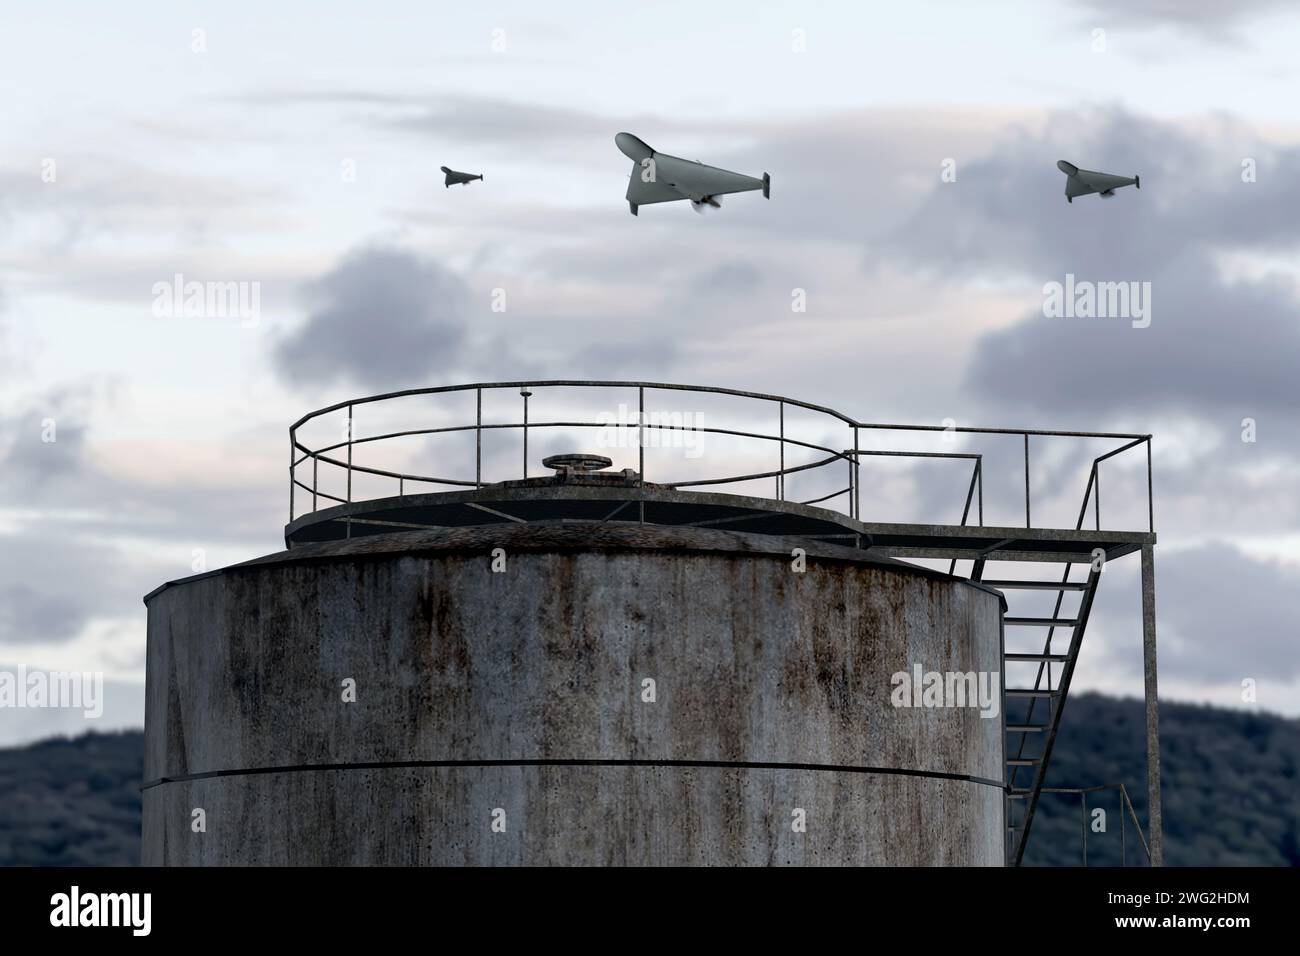 Group of military drones attacking oil and fuel tank, 3d render. Stock Photo